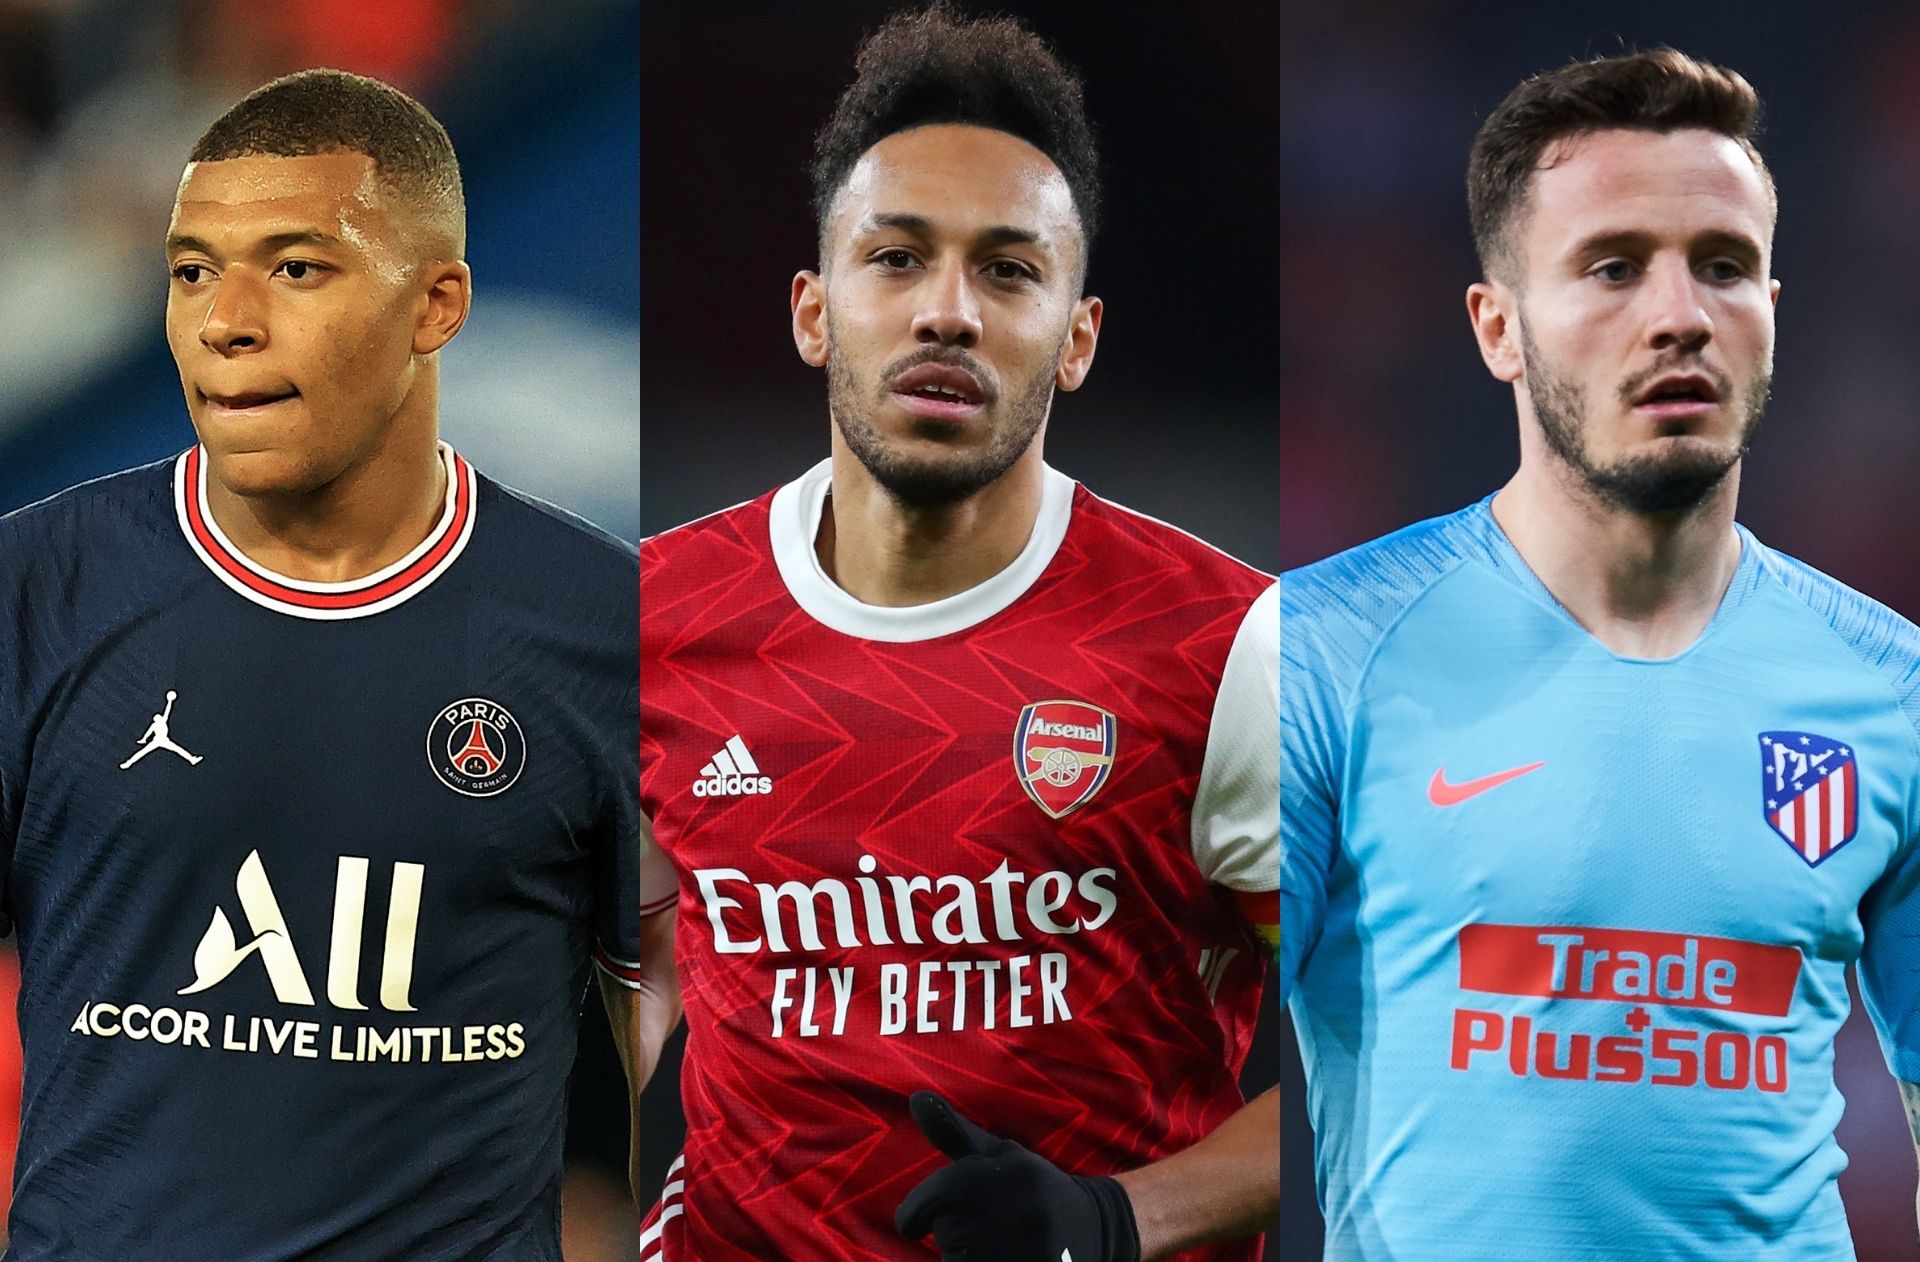 Tuesday's transfer rumors - Neymar lists Mbappe replacement for PSG